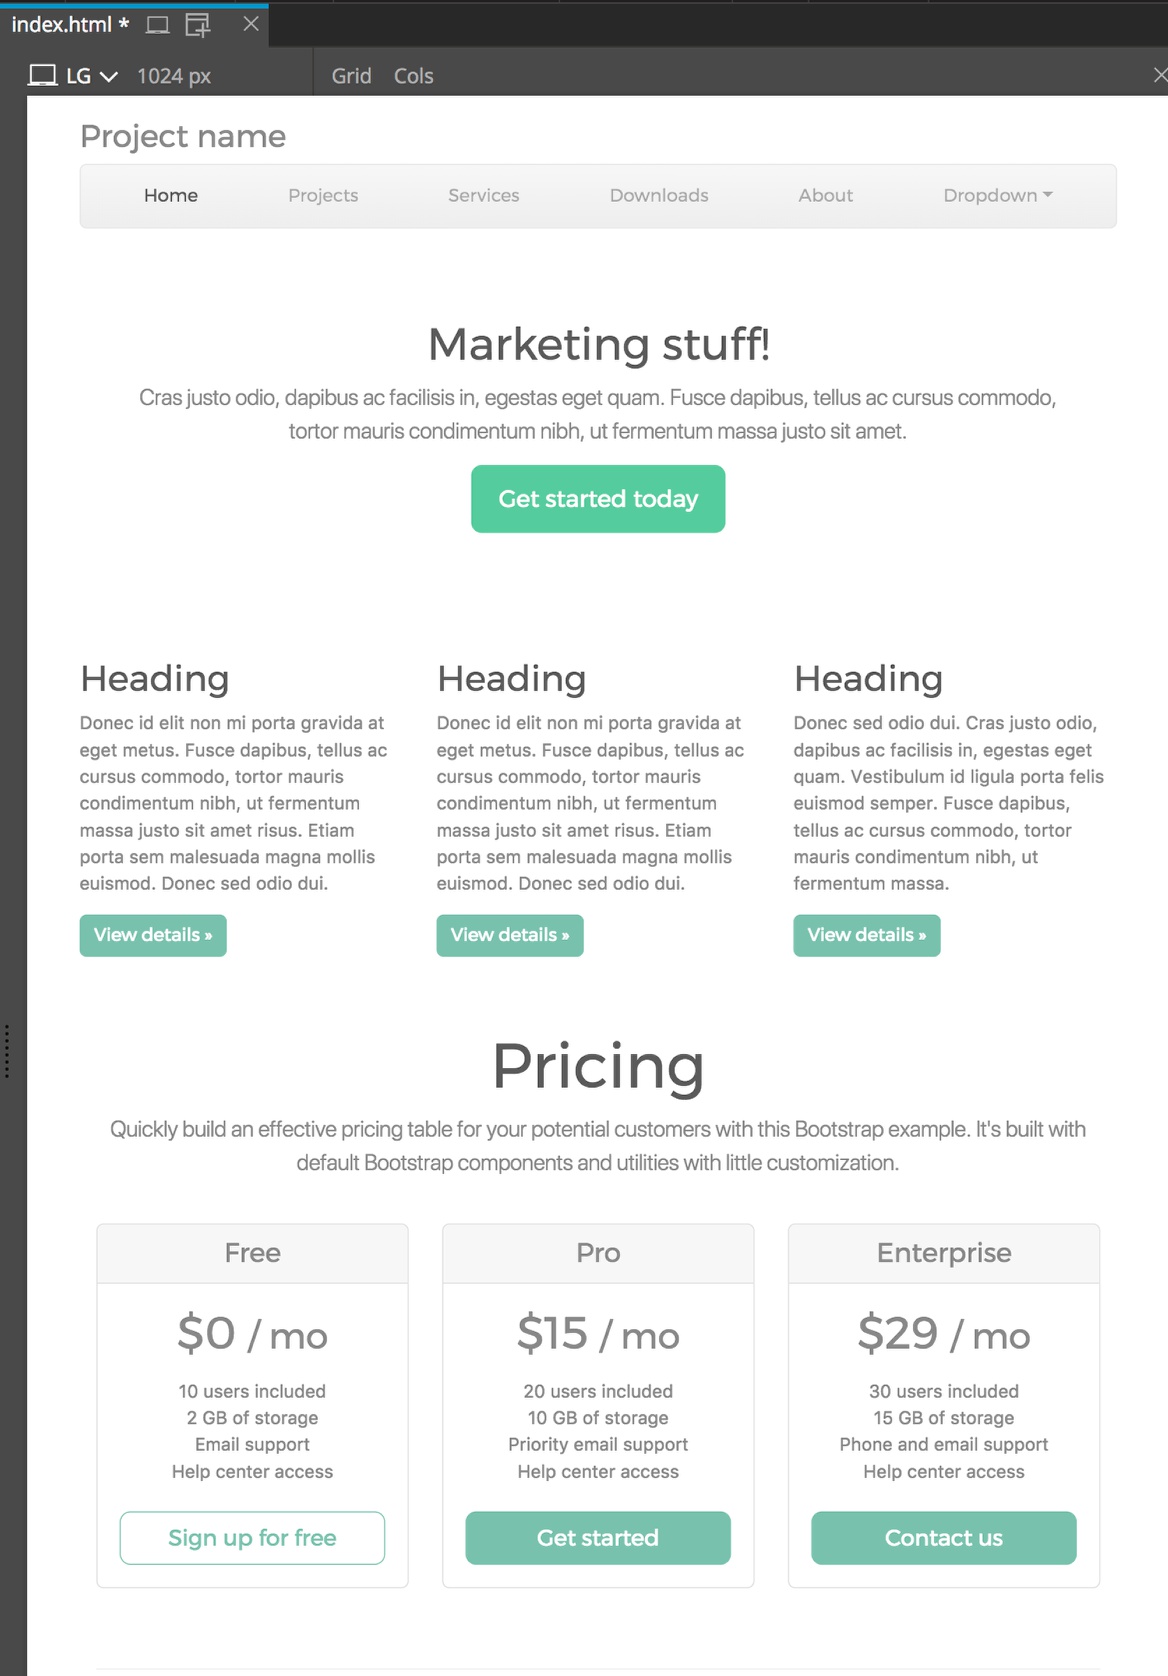 Screenshot of the Pinegrow Bootstrap 4 page with Minty styling